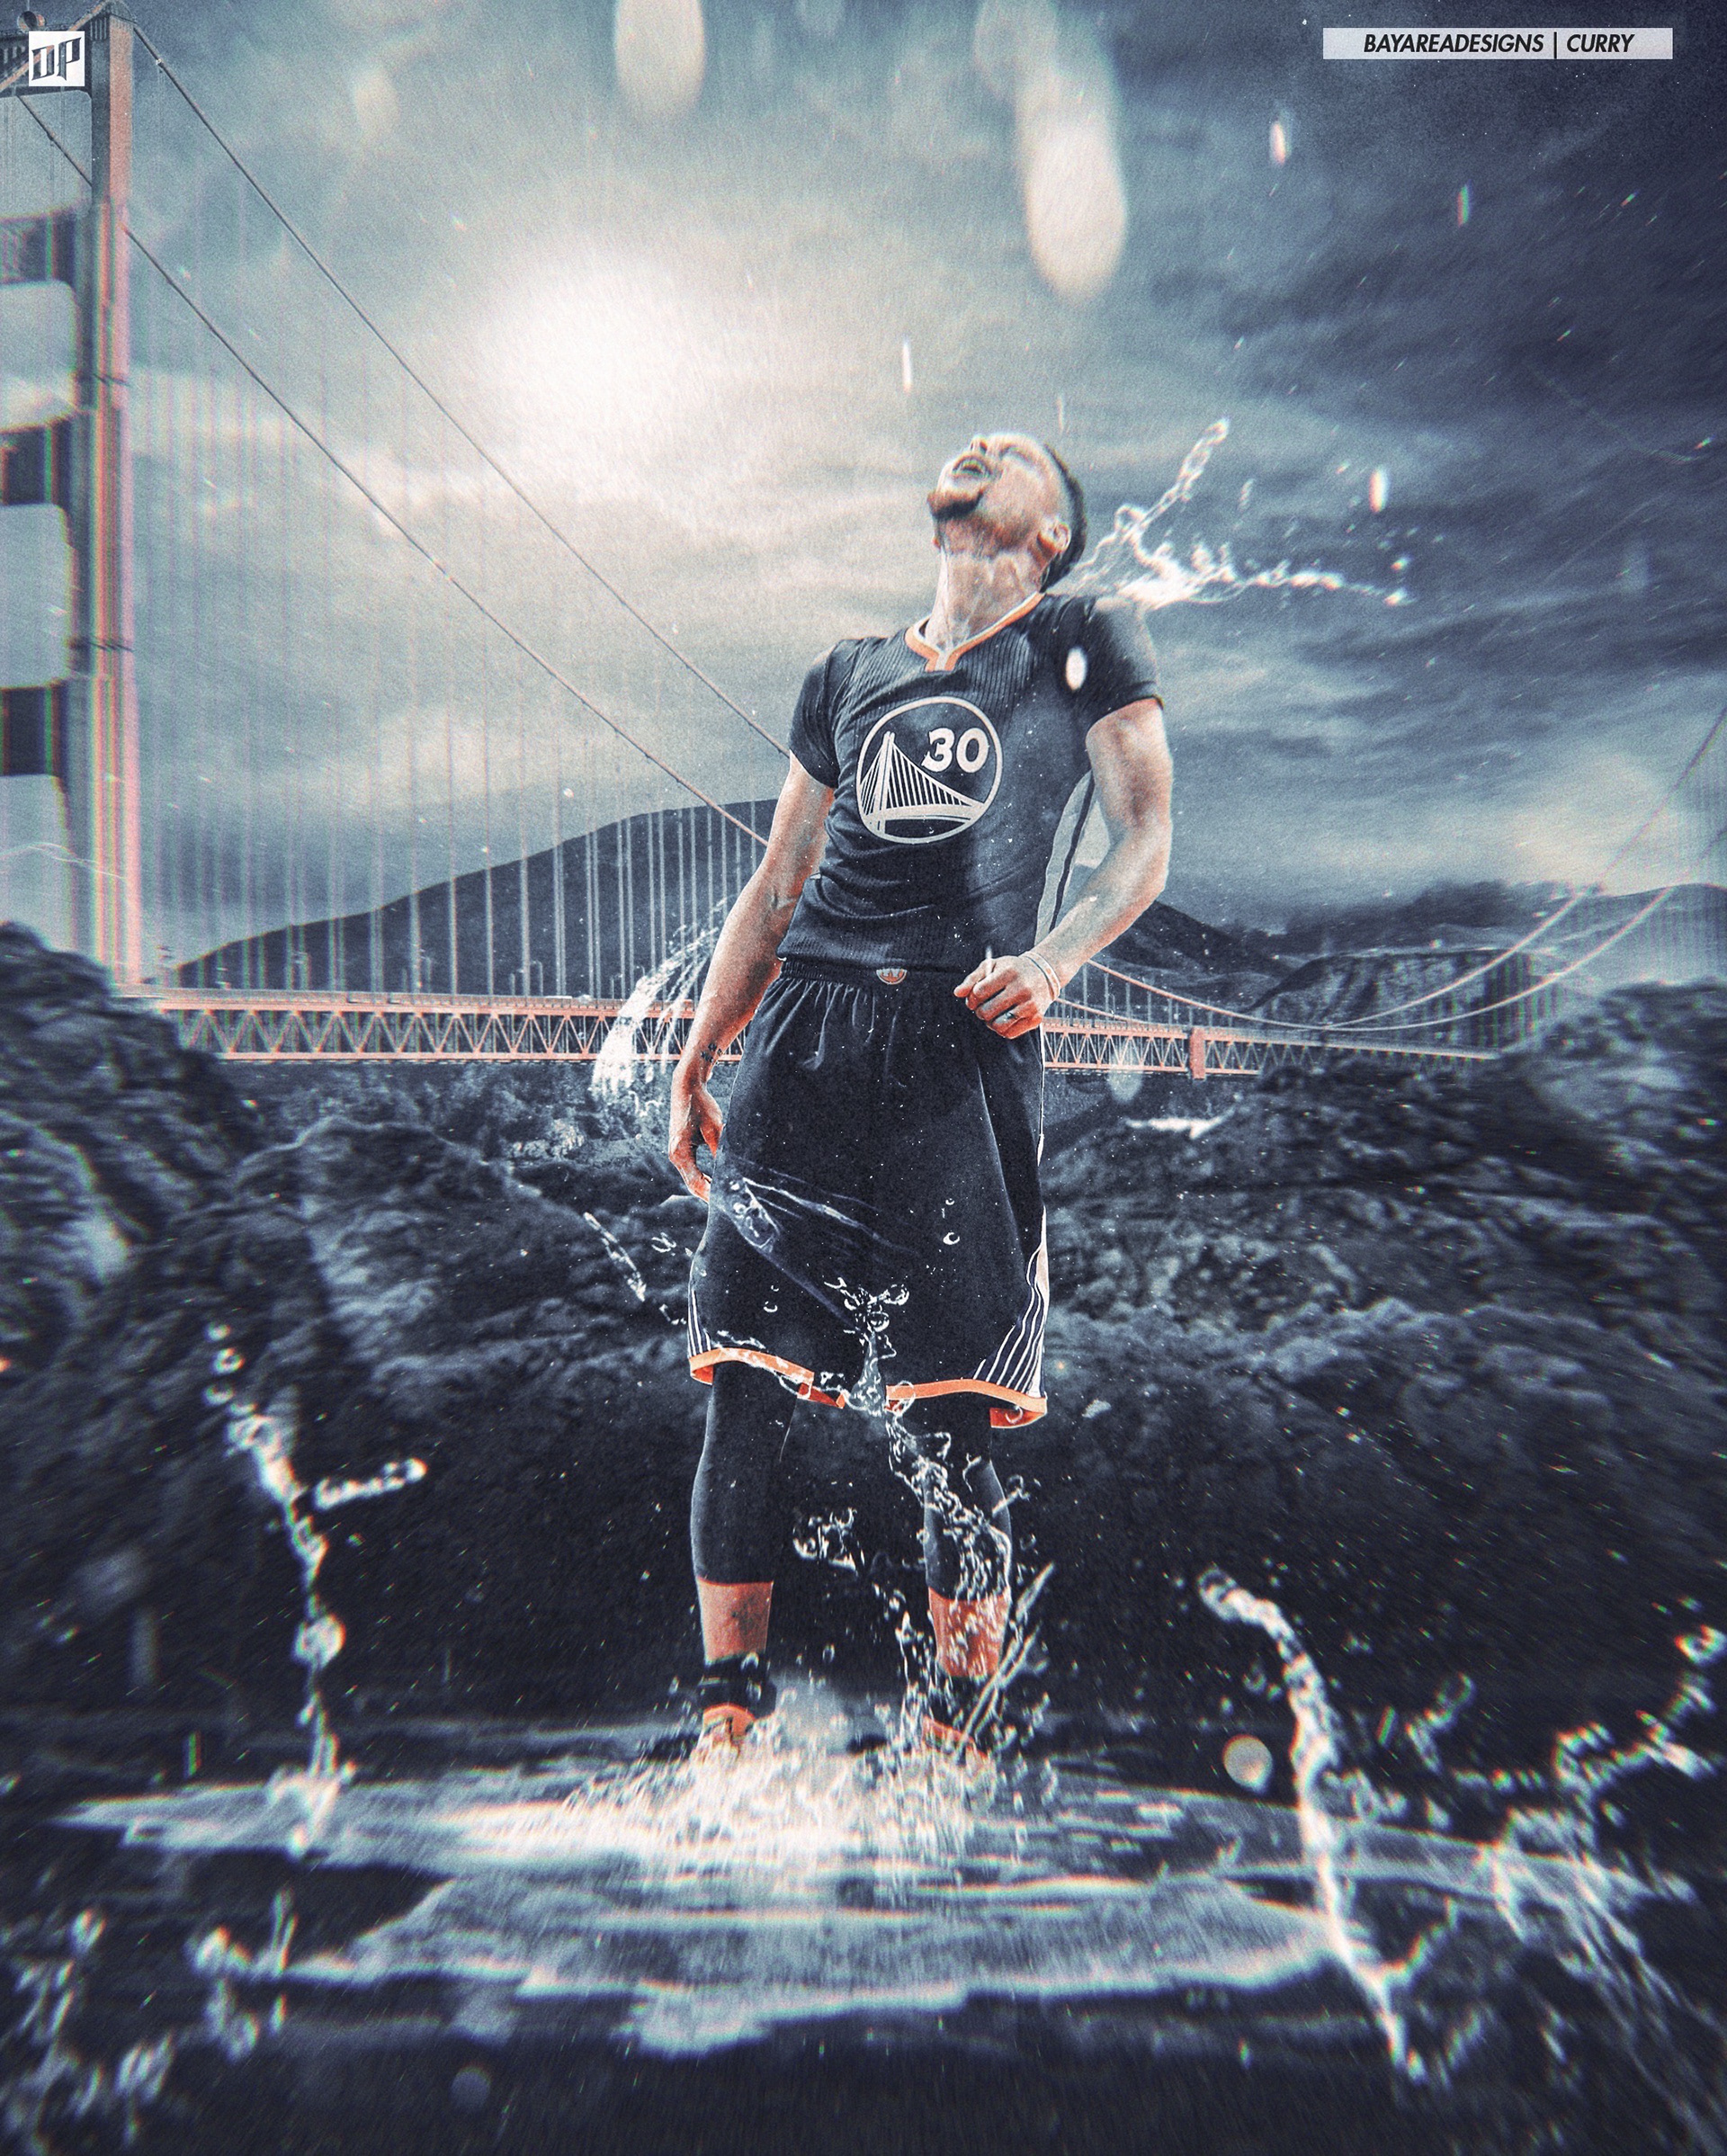 Stephen Curry Wallpaper collaboration | Behance